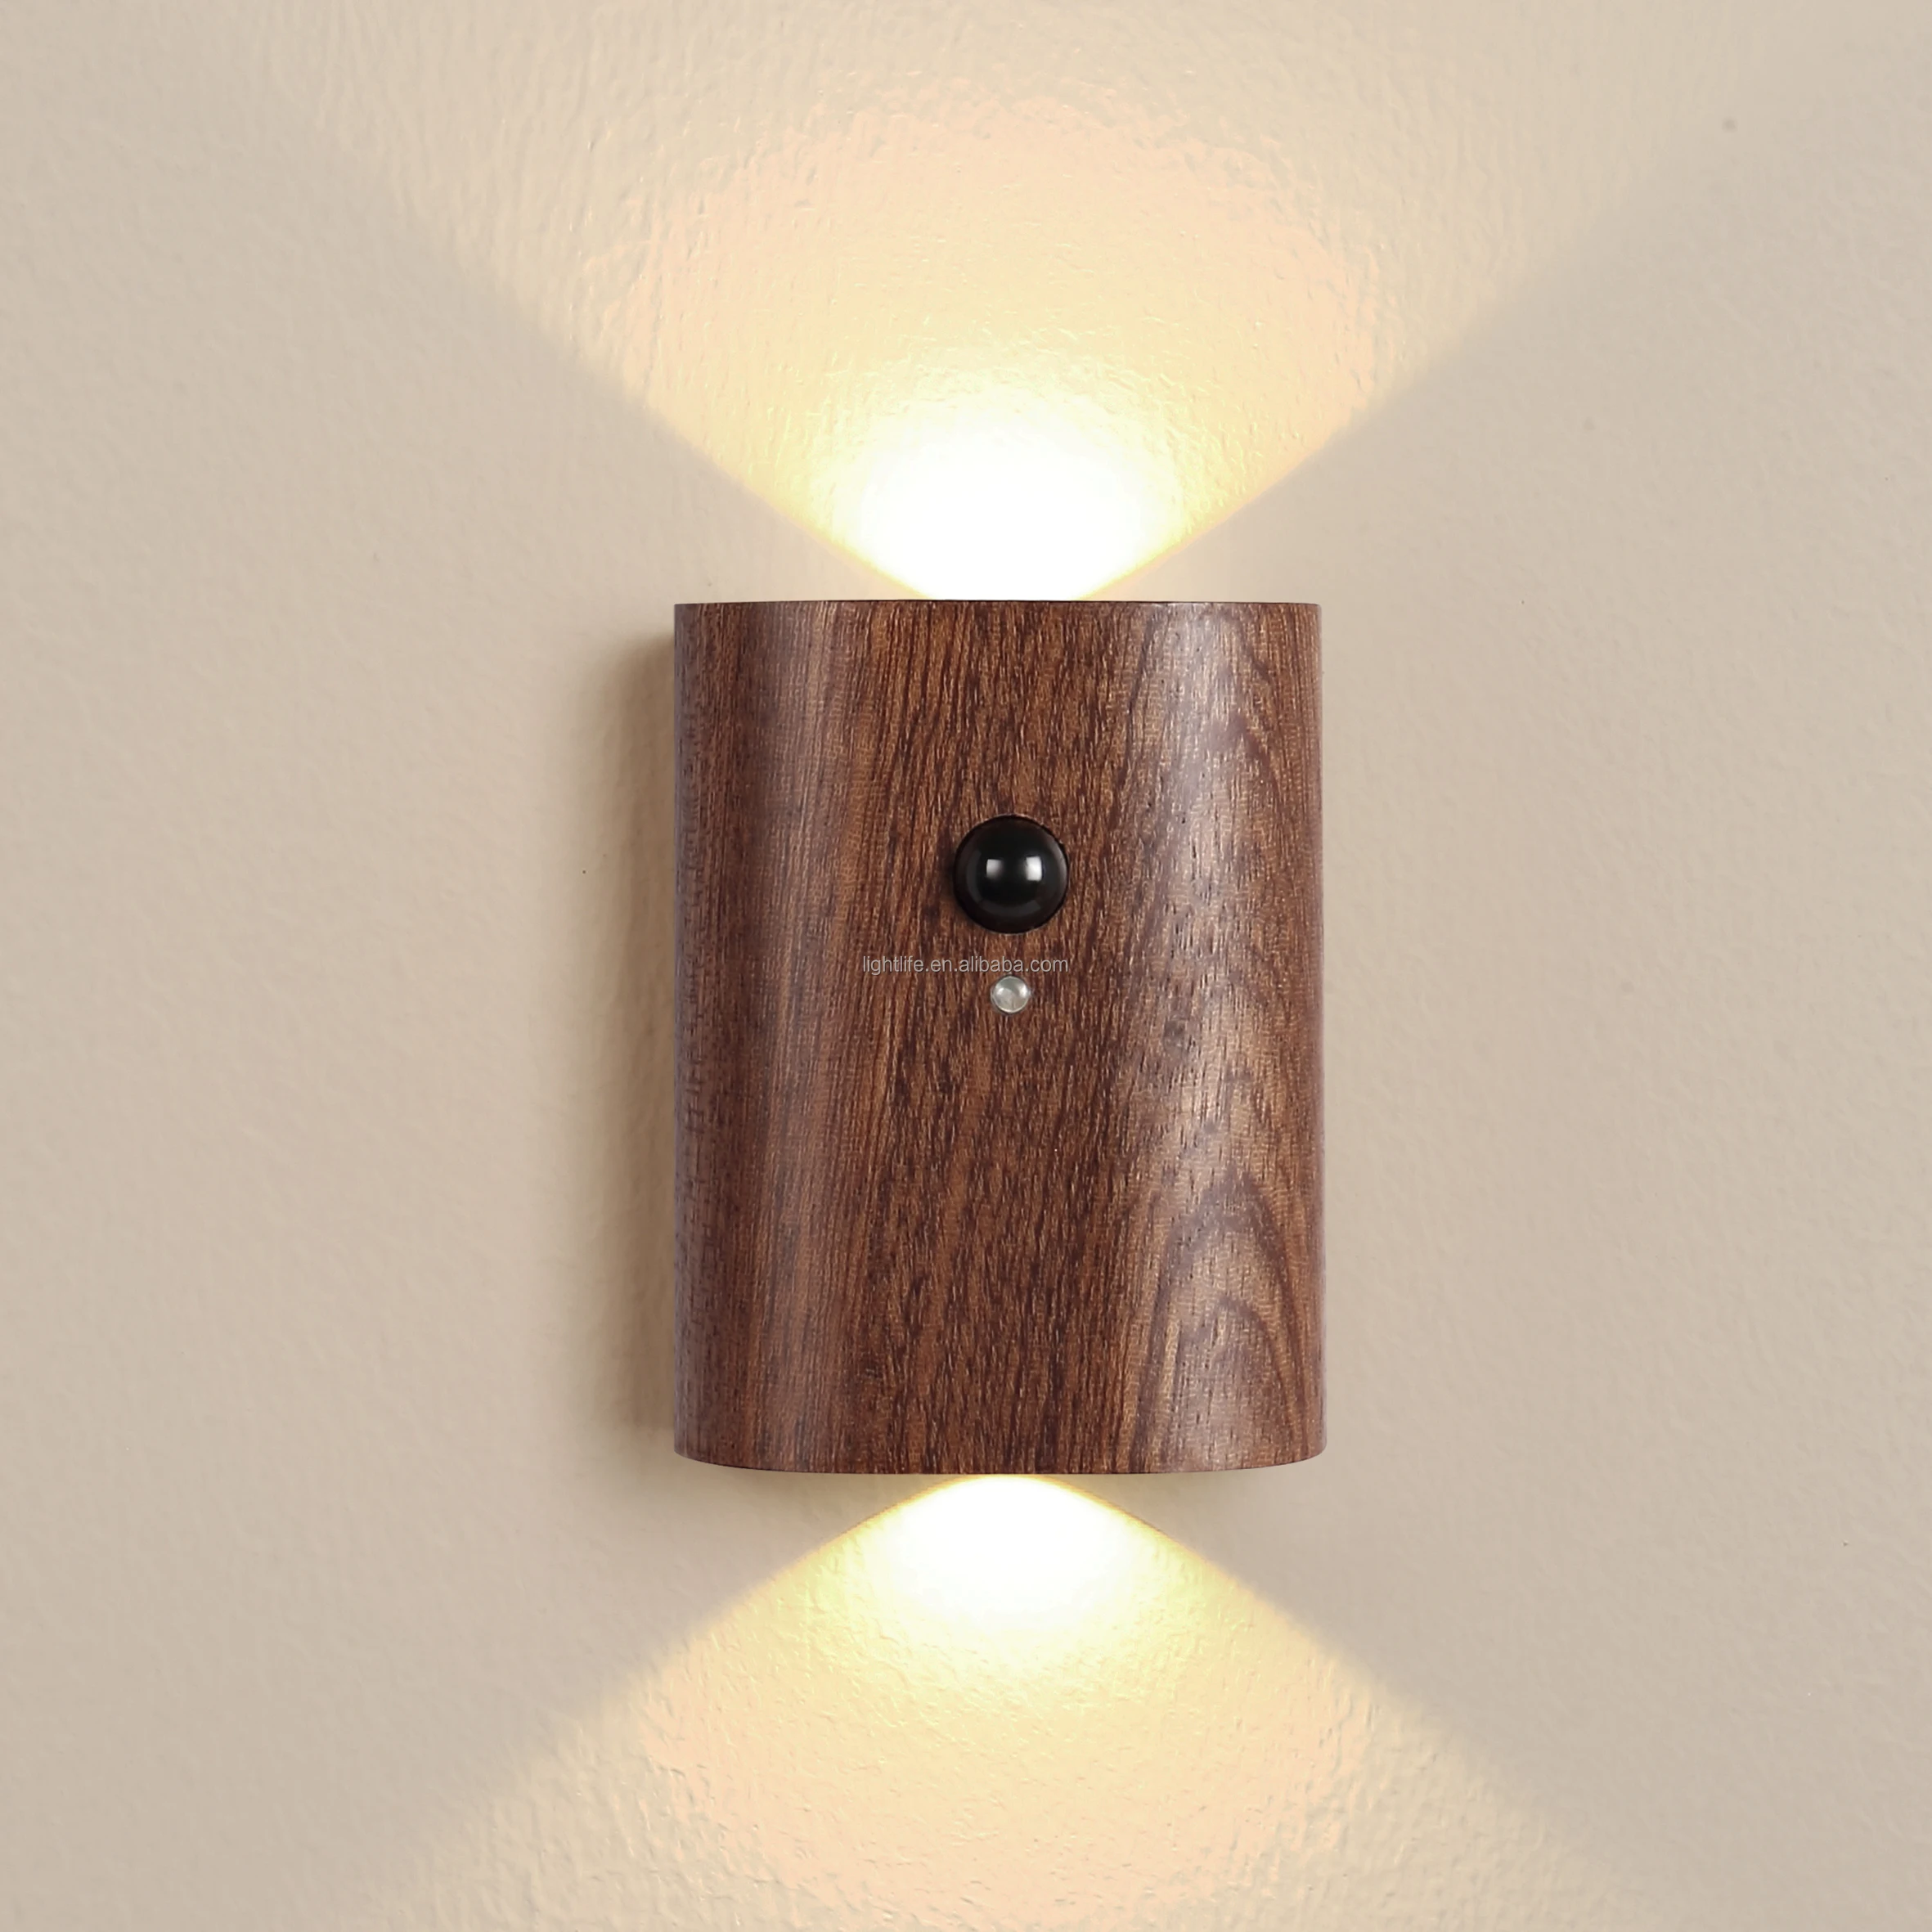 

Wood Smart Automatic Magnetic Pir Motion Sensor LED Night Light Up And Down Sconce Wireless Wall Indoor Body Induction Lamp